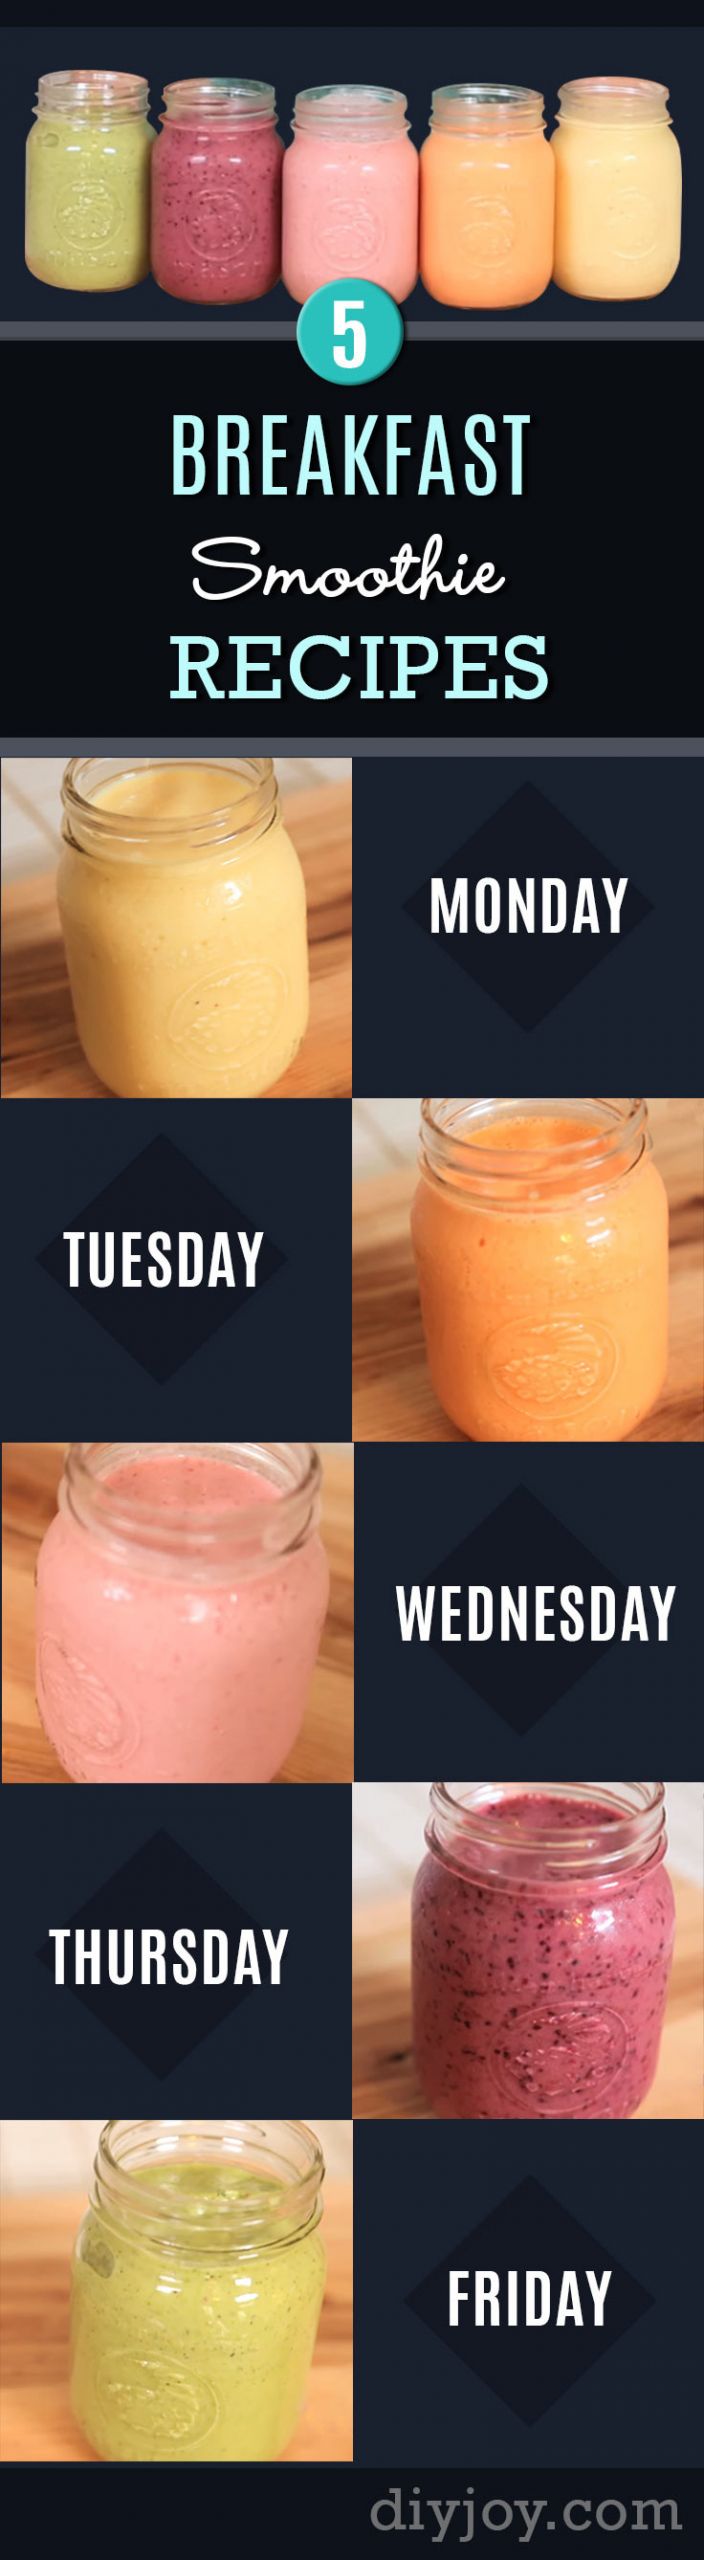 Low Calorie Smoothies For Weight Loss
 Monday to Friday 5 Ultimate Breakfast Smoothie Recipes